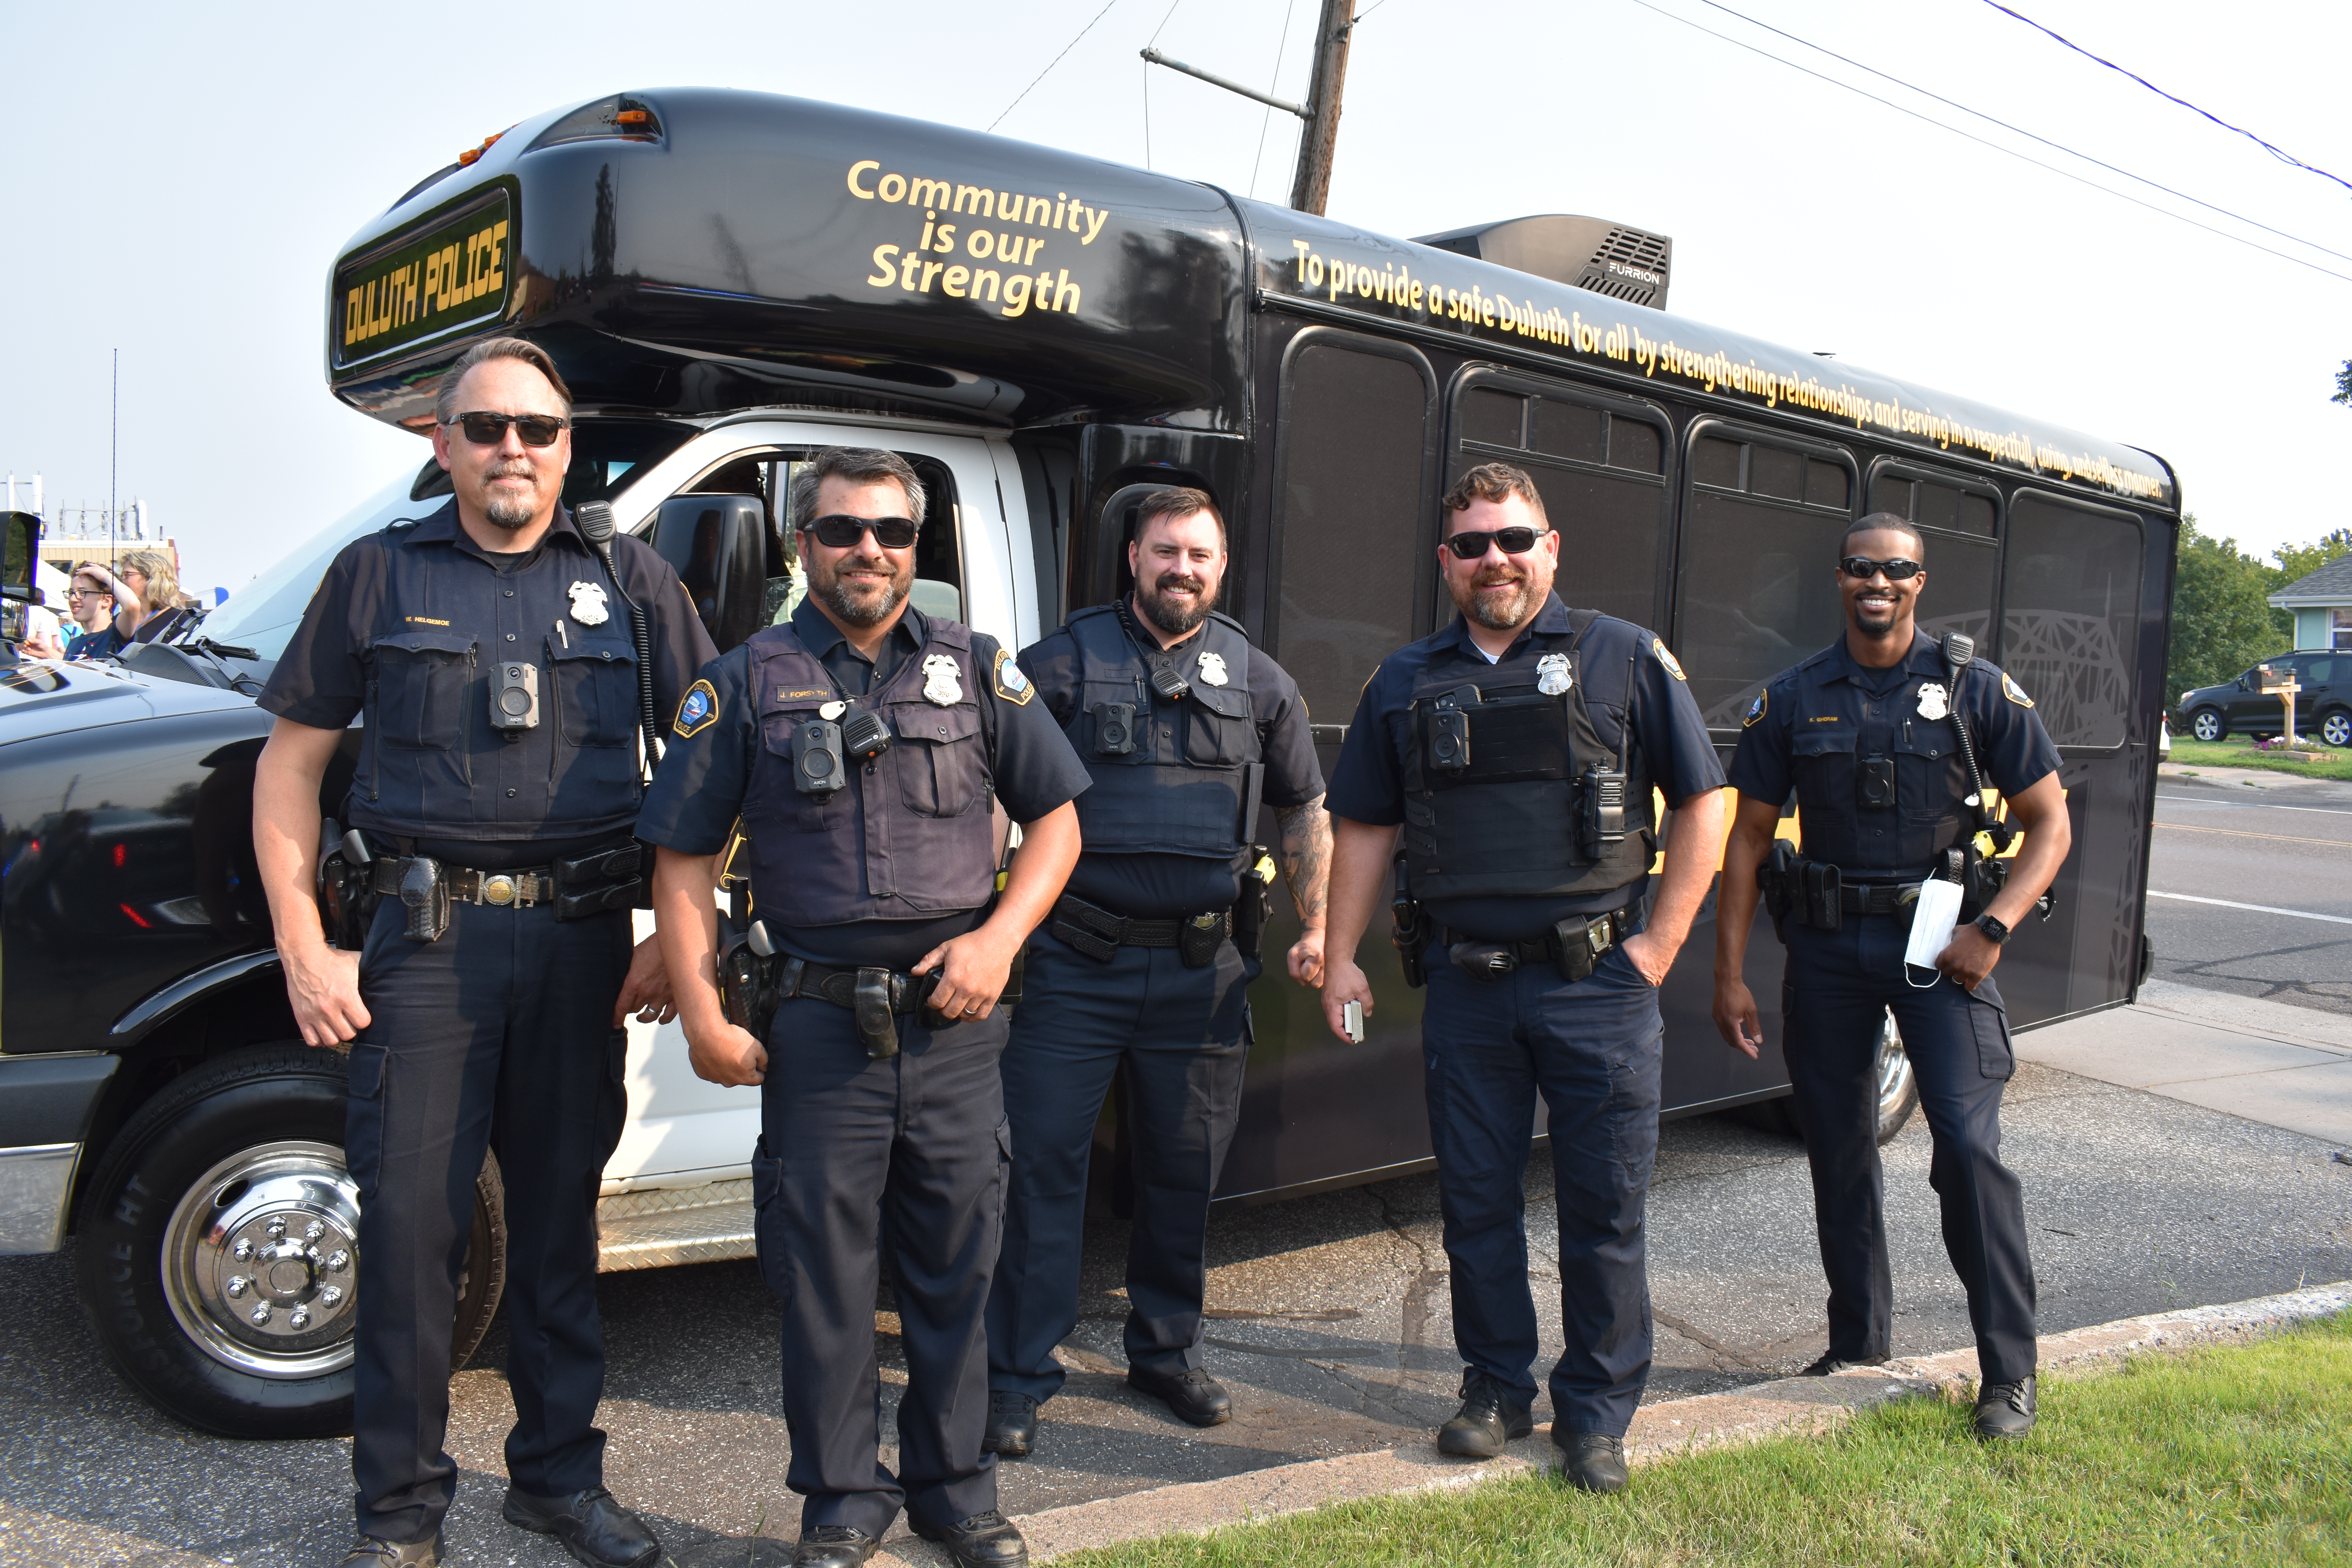 CODE4, the Duluth Police Department's community fun bus, travels throughout the community and stops in at a variety of events to engage with members of the public.